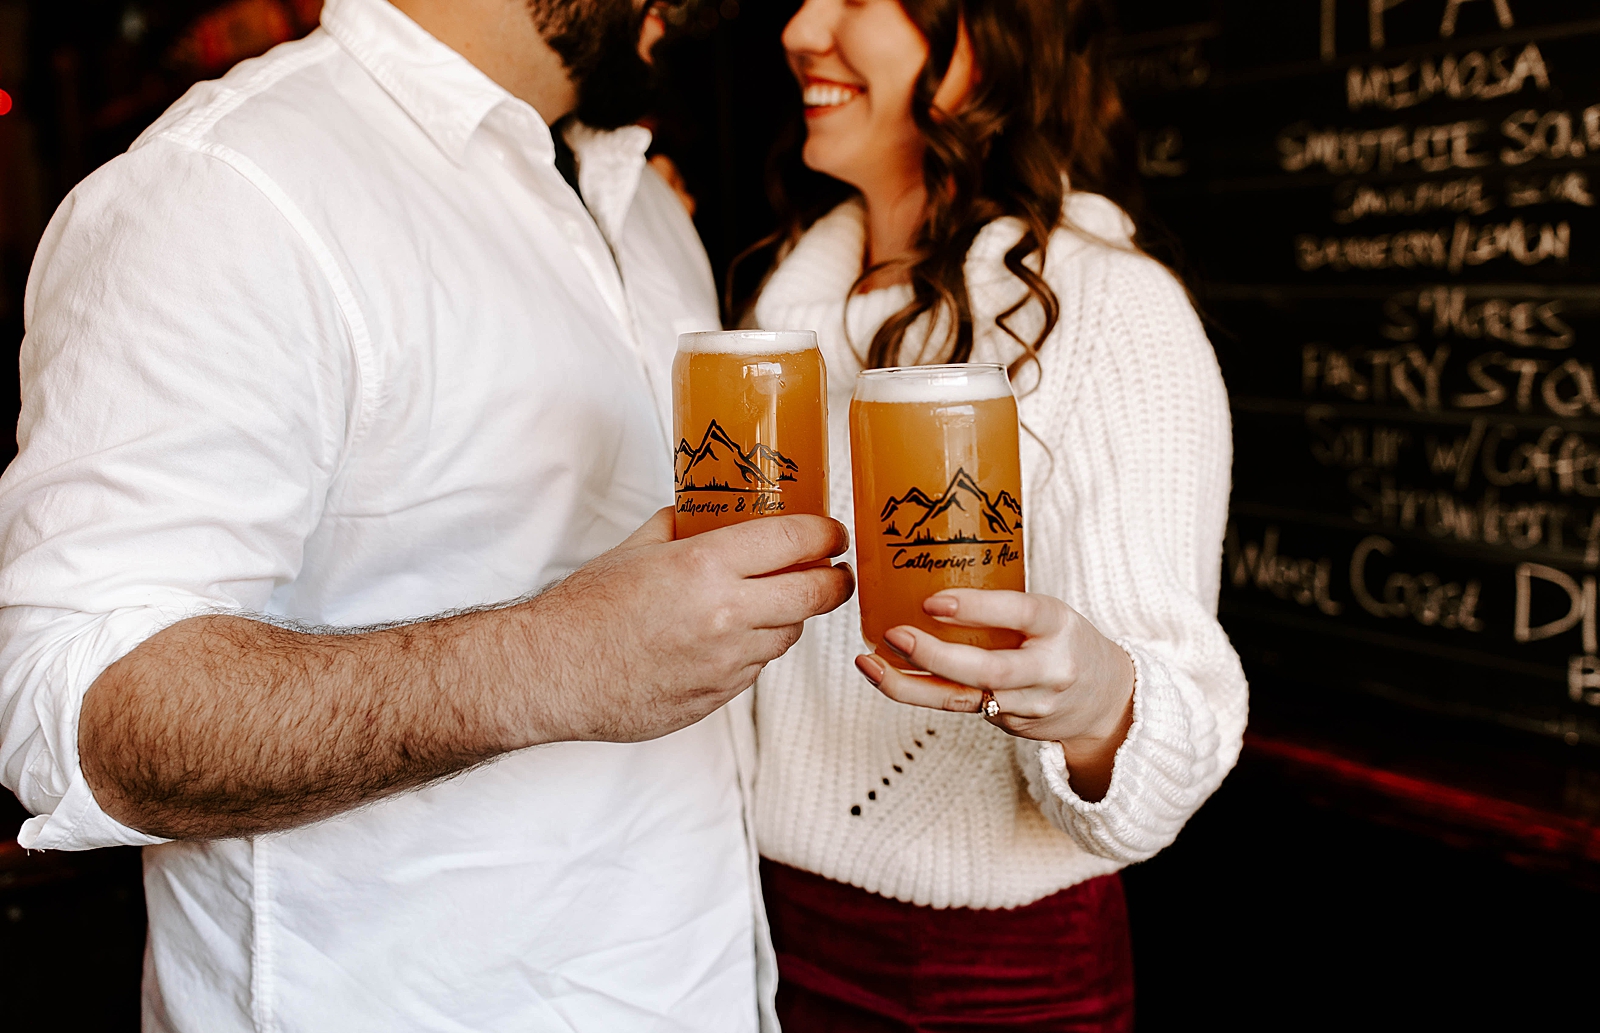 Pittsburgh Brewery; Hitchhikers Brewing Co. Mt. Lebanon; engagement sessions; Rachel Wehan Photographer